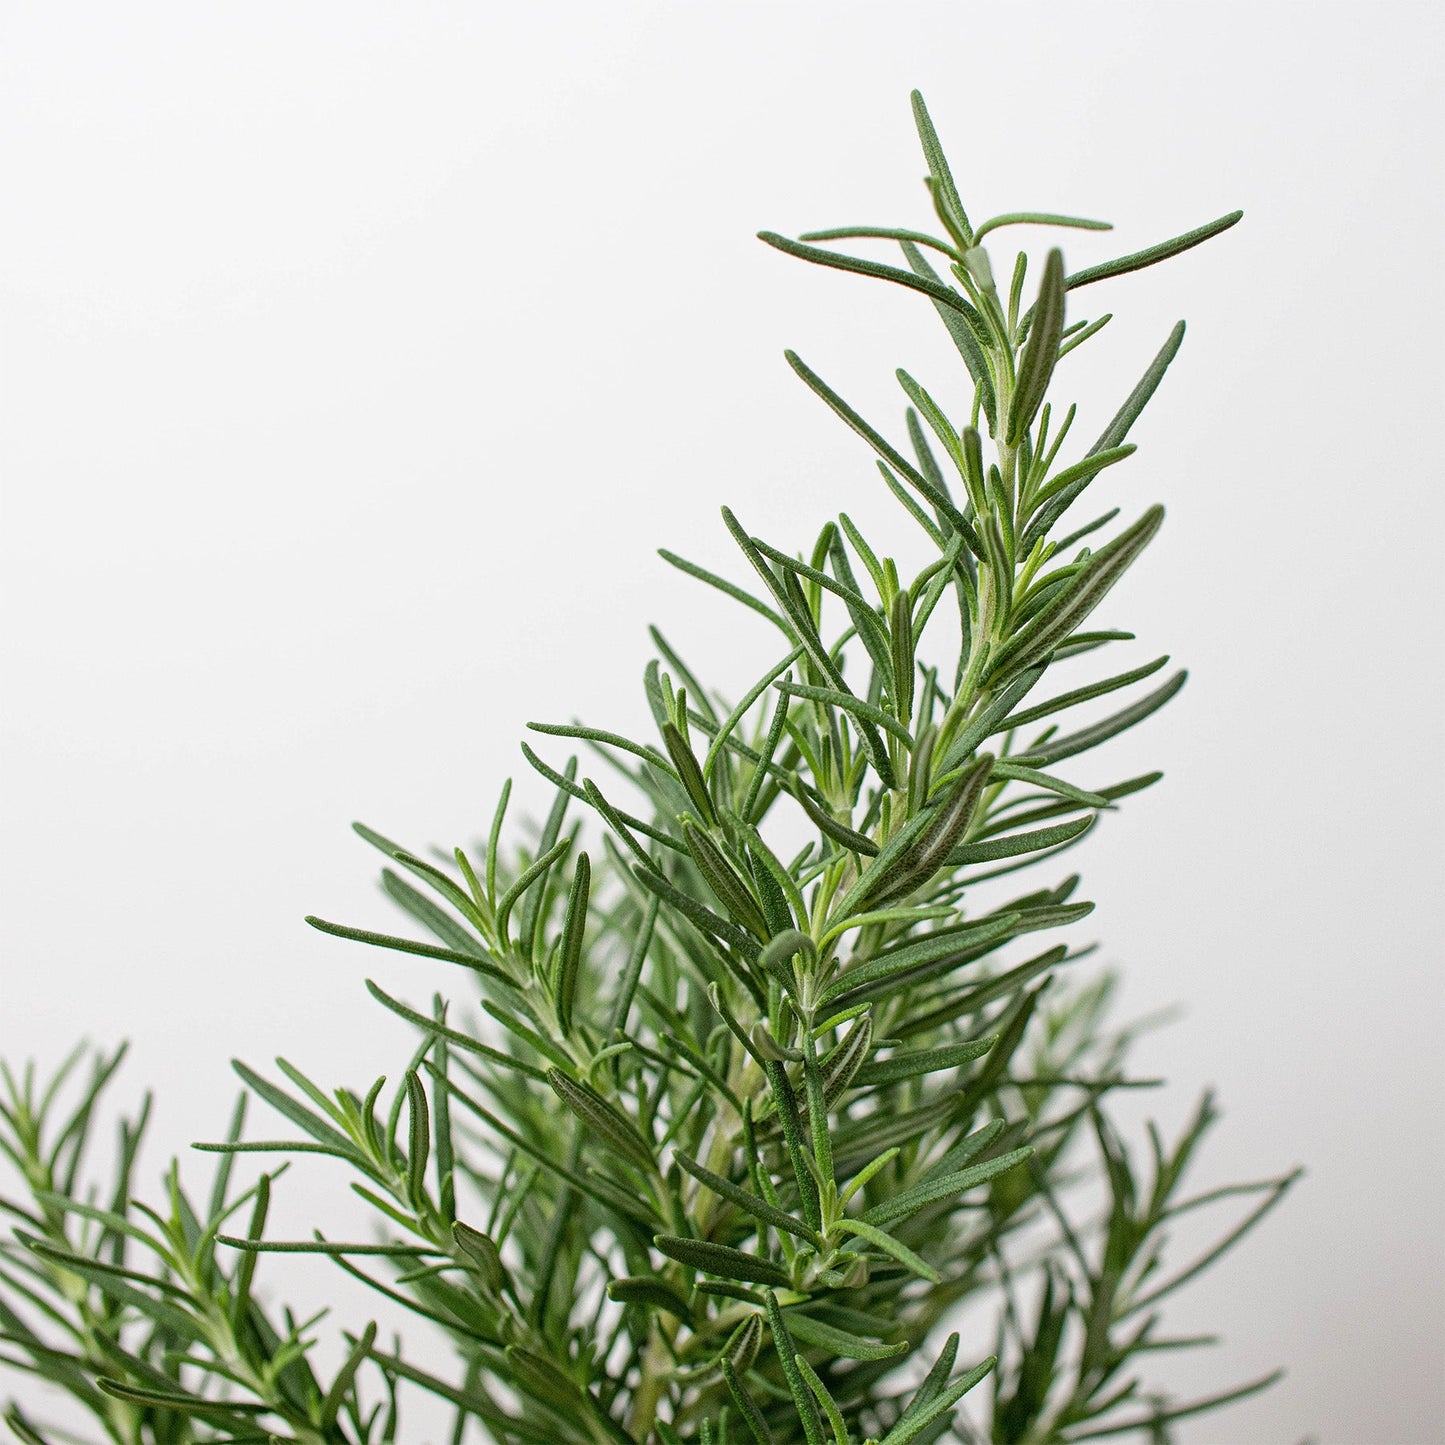 Rosemary Herb 'Tuscan Blue' - 4" Pot